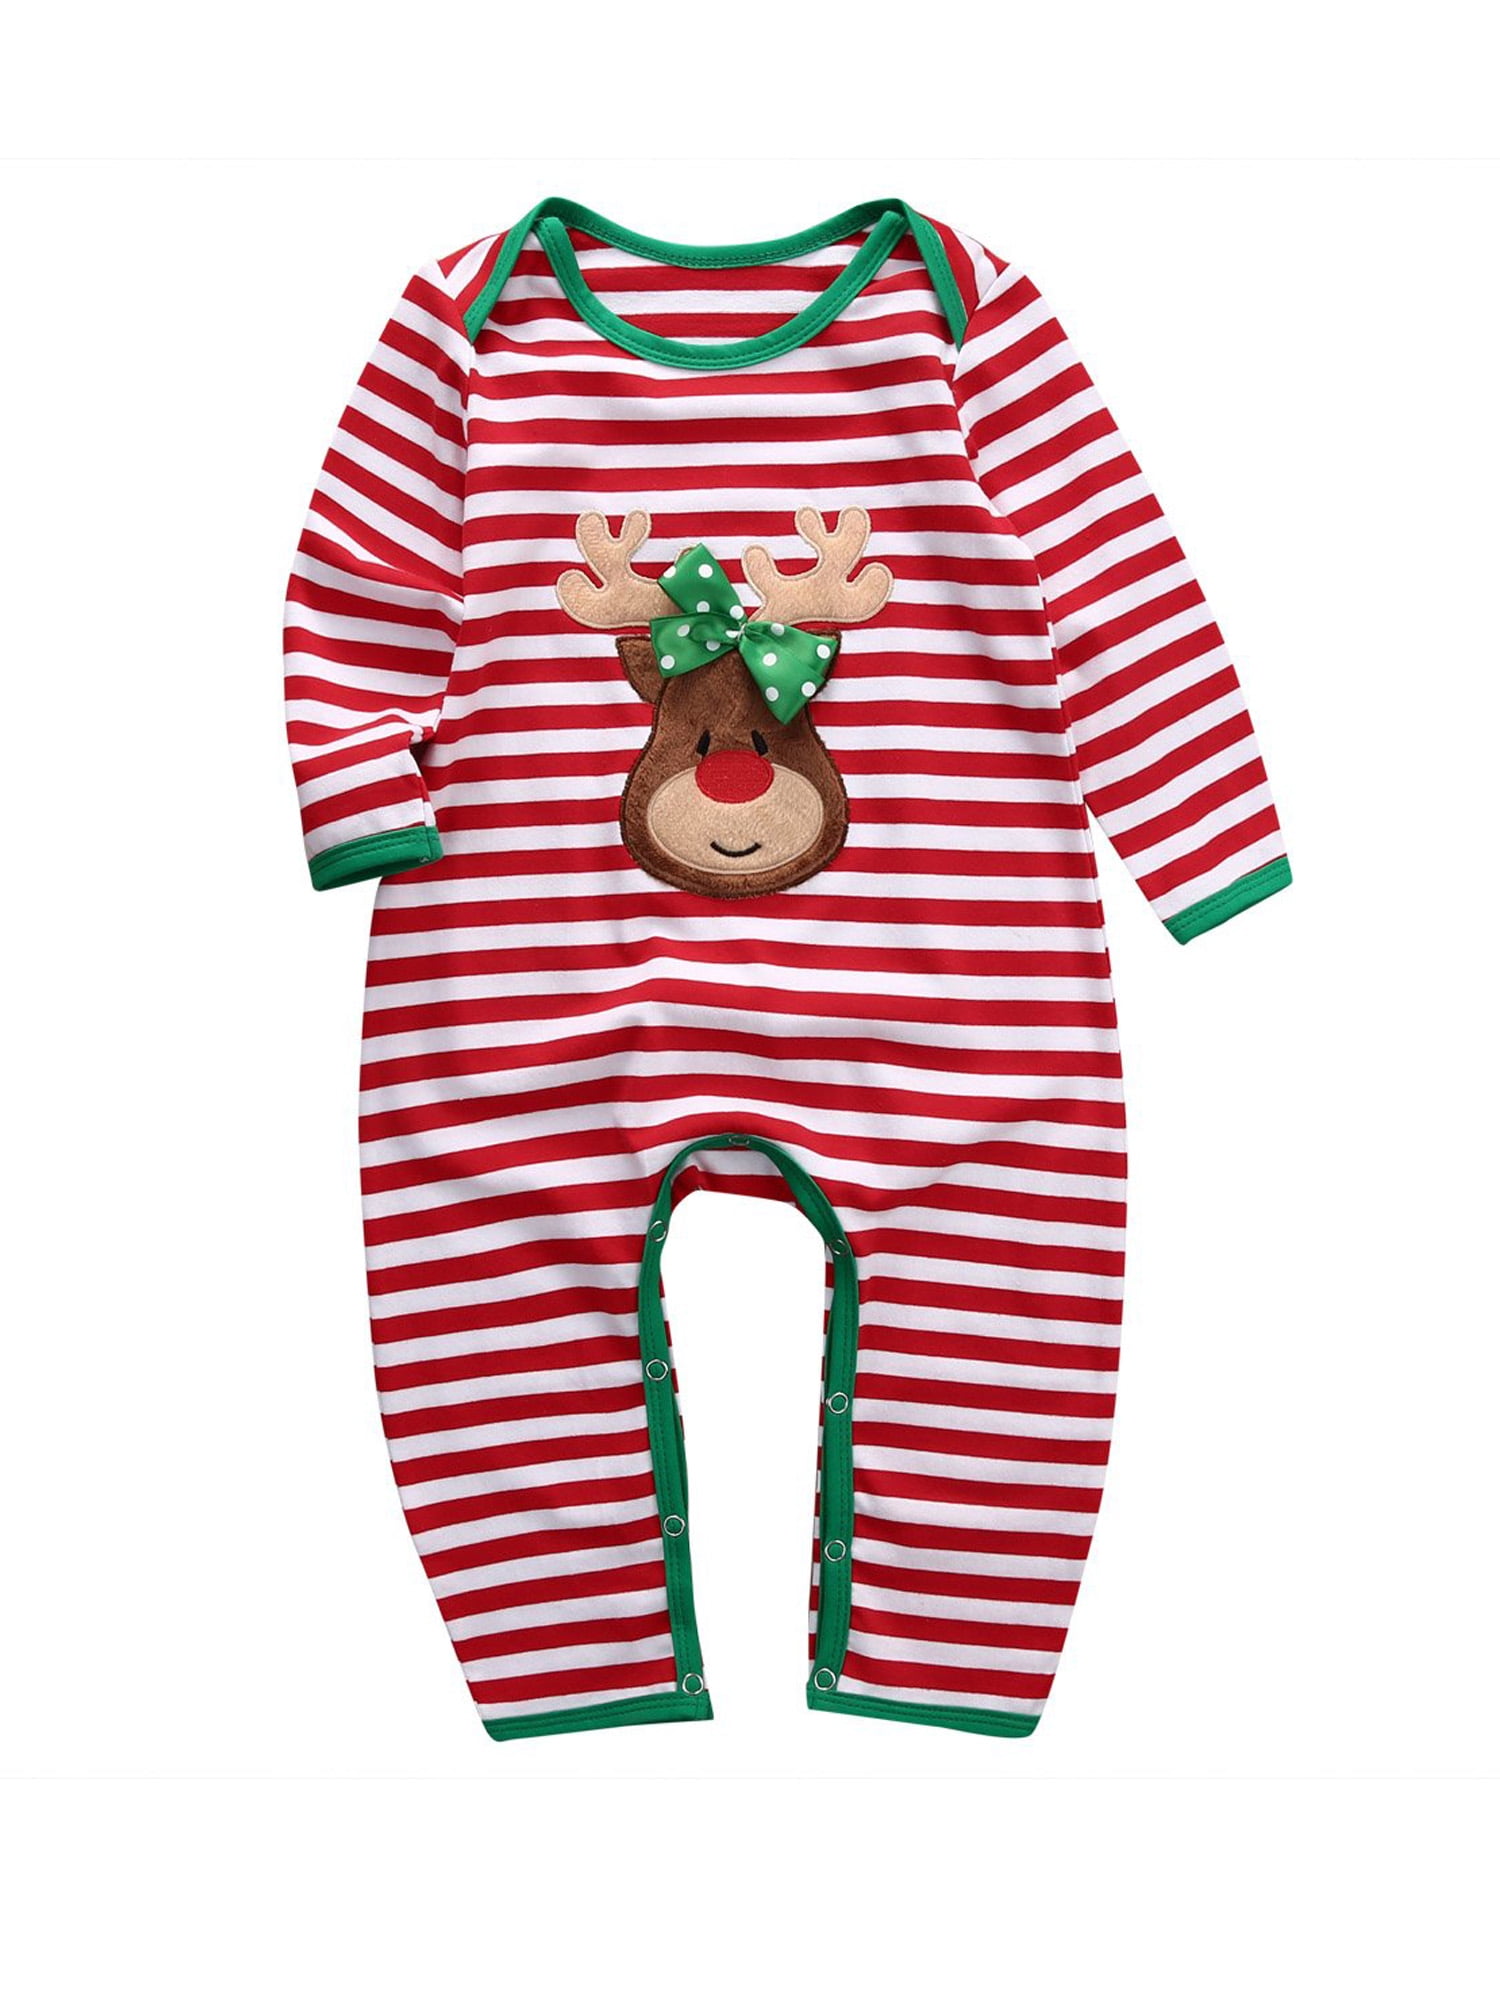 Details about   CARTER'S 1PC CHRISTMAS RED GREEN BOY GIRL SLEEP & PLAY FOOTLESS PAJAMAS 3M 